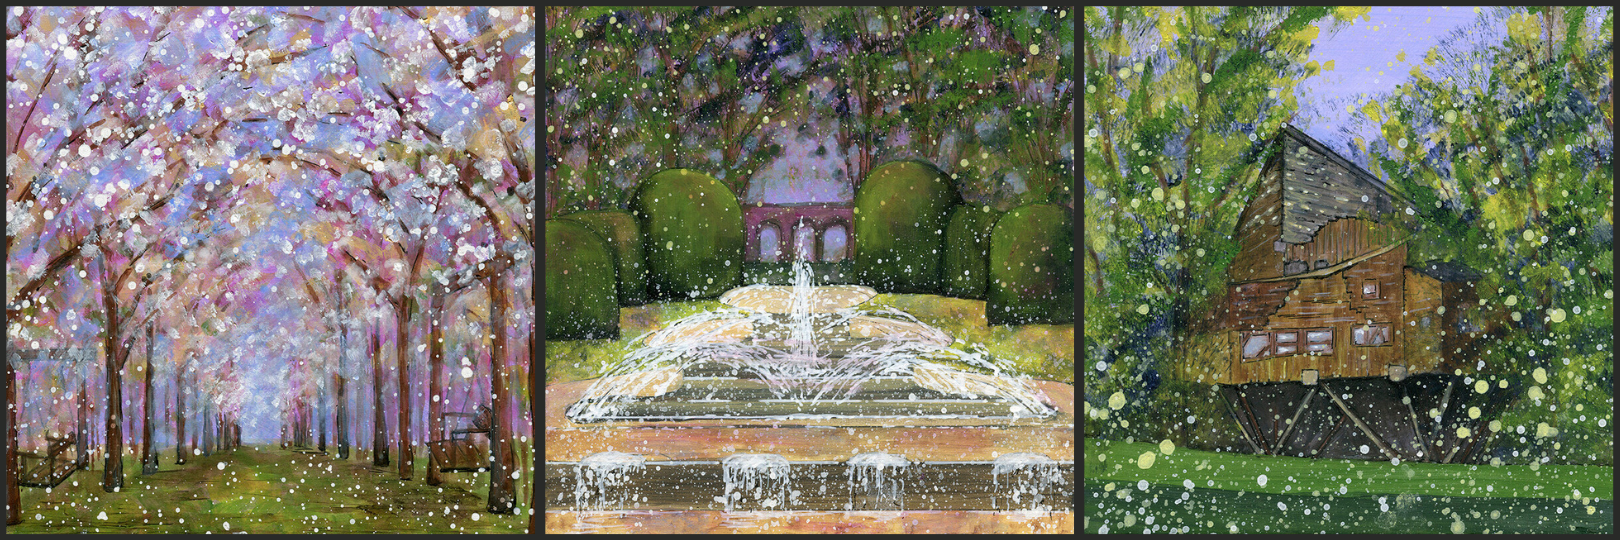 Fountains Abbey, Emily Ward Products